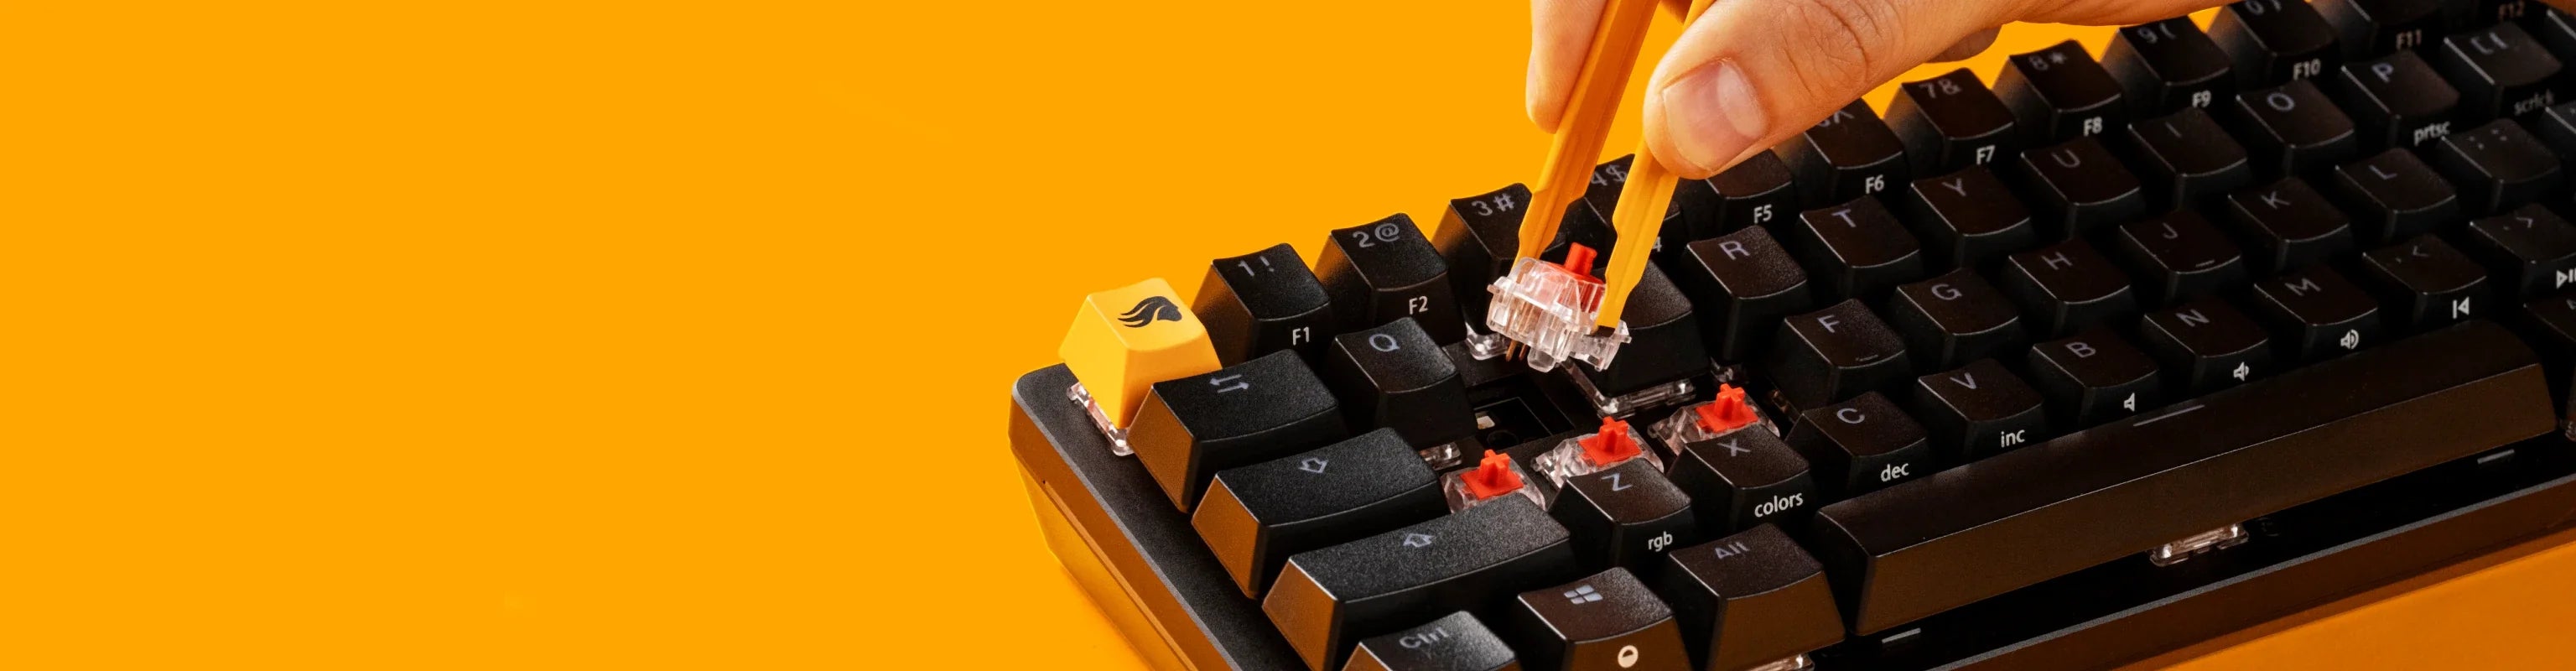 Person replacing switches with a switch puller on a Black GMMK 2 keyboard 